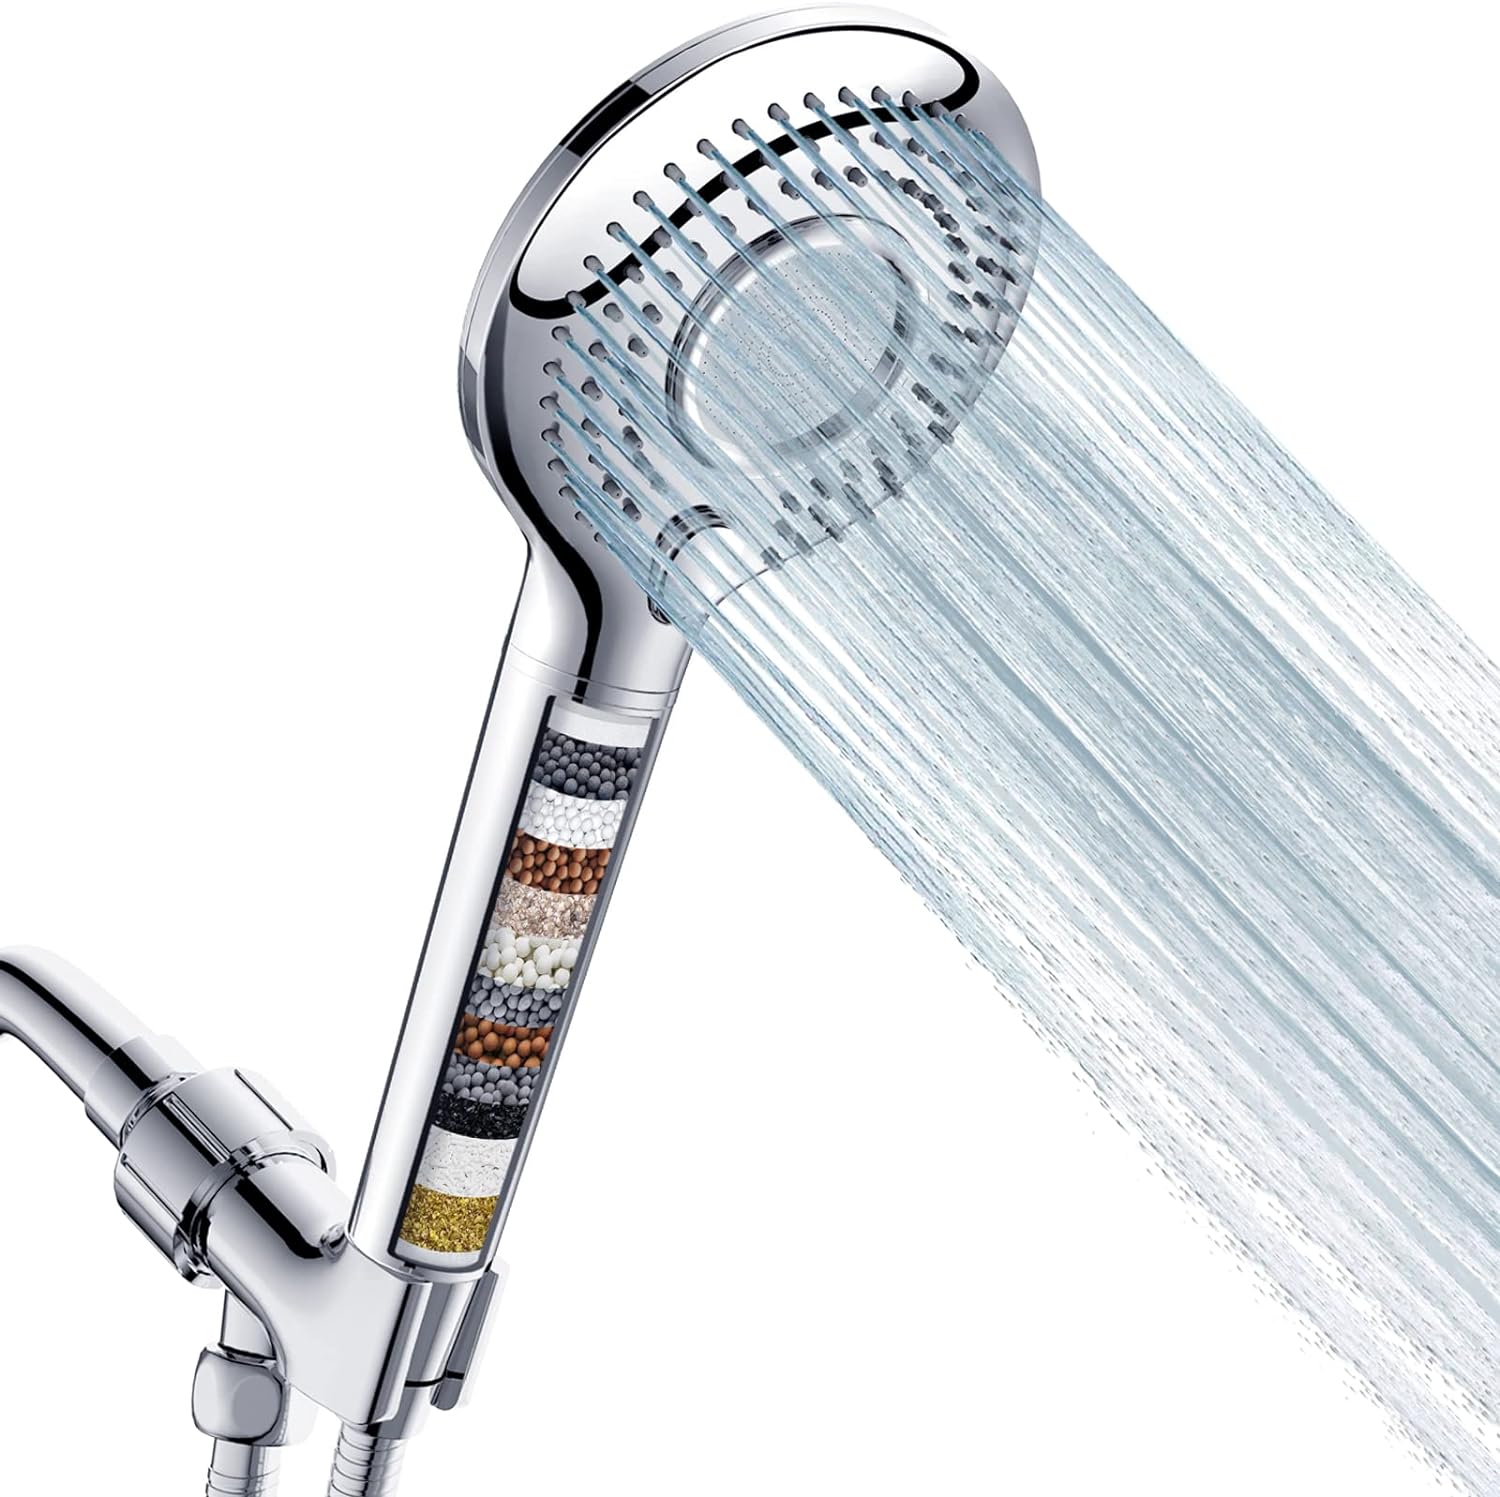 FEELSO Filtered Shower Head with Handheld, High Pressure 3 Spray Mode Showerhead with 60 Hose, Bracket and 15 Stage Water Softener Filters for Hard Water Remove Chlorine and Harmful Substance